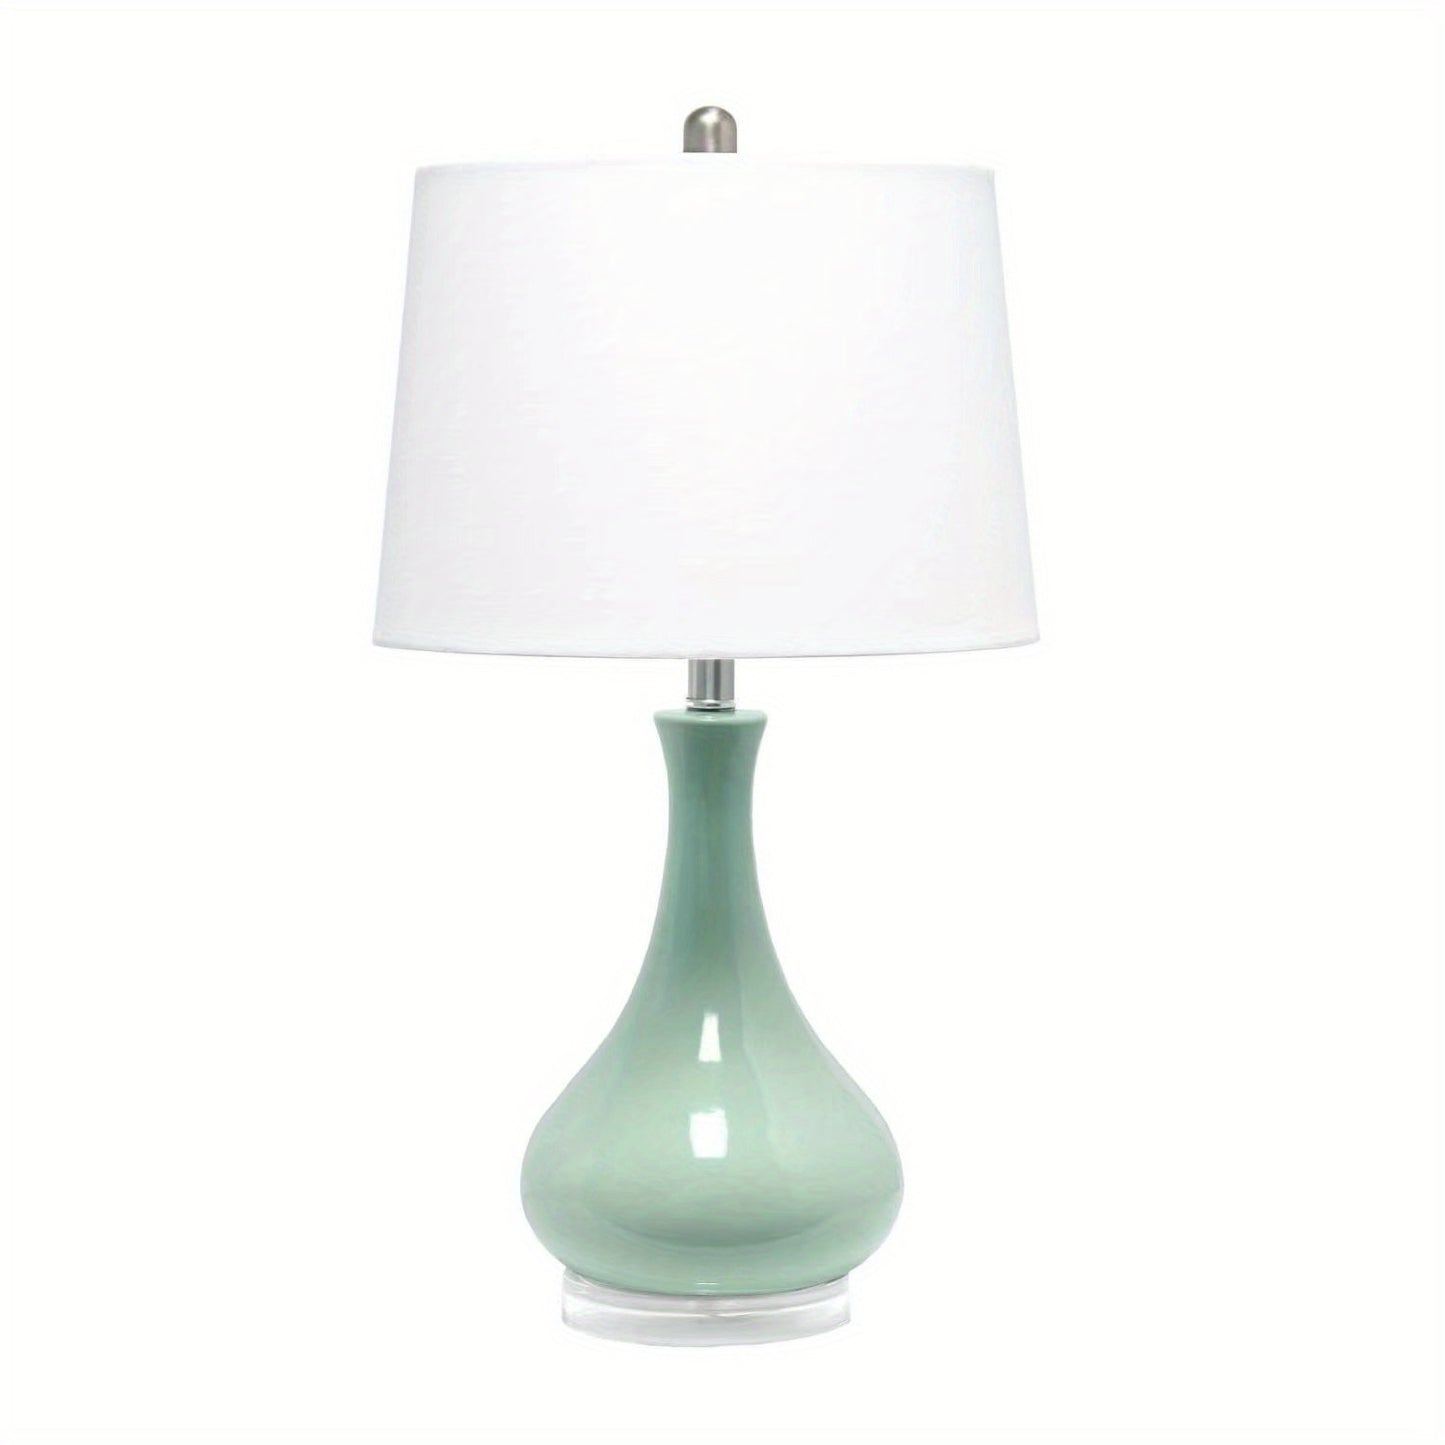 Porcelain Table Lamp with Off-White Linen Lampshade, Ceramic Vase Base, 14 x 24.6 Inch, 5 Colors